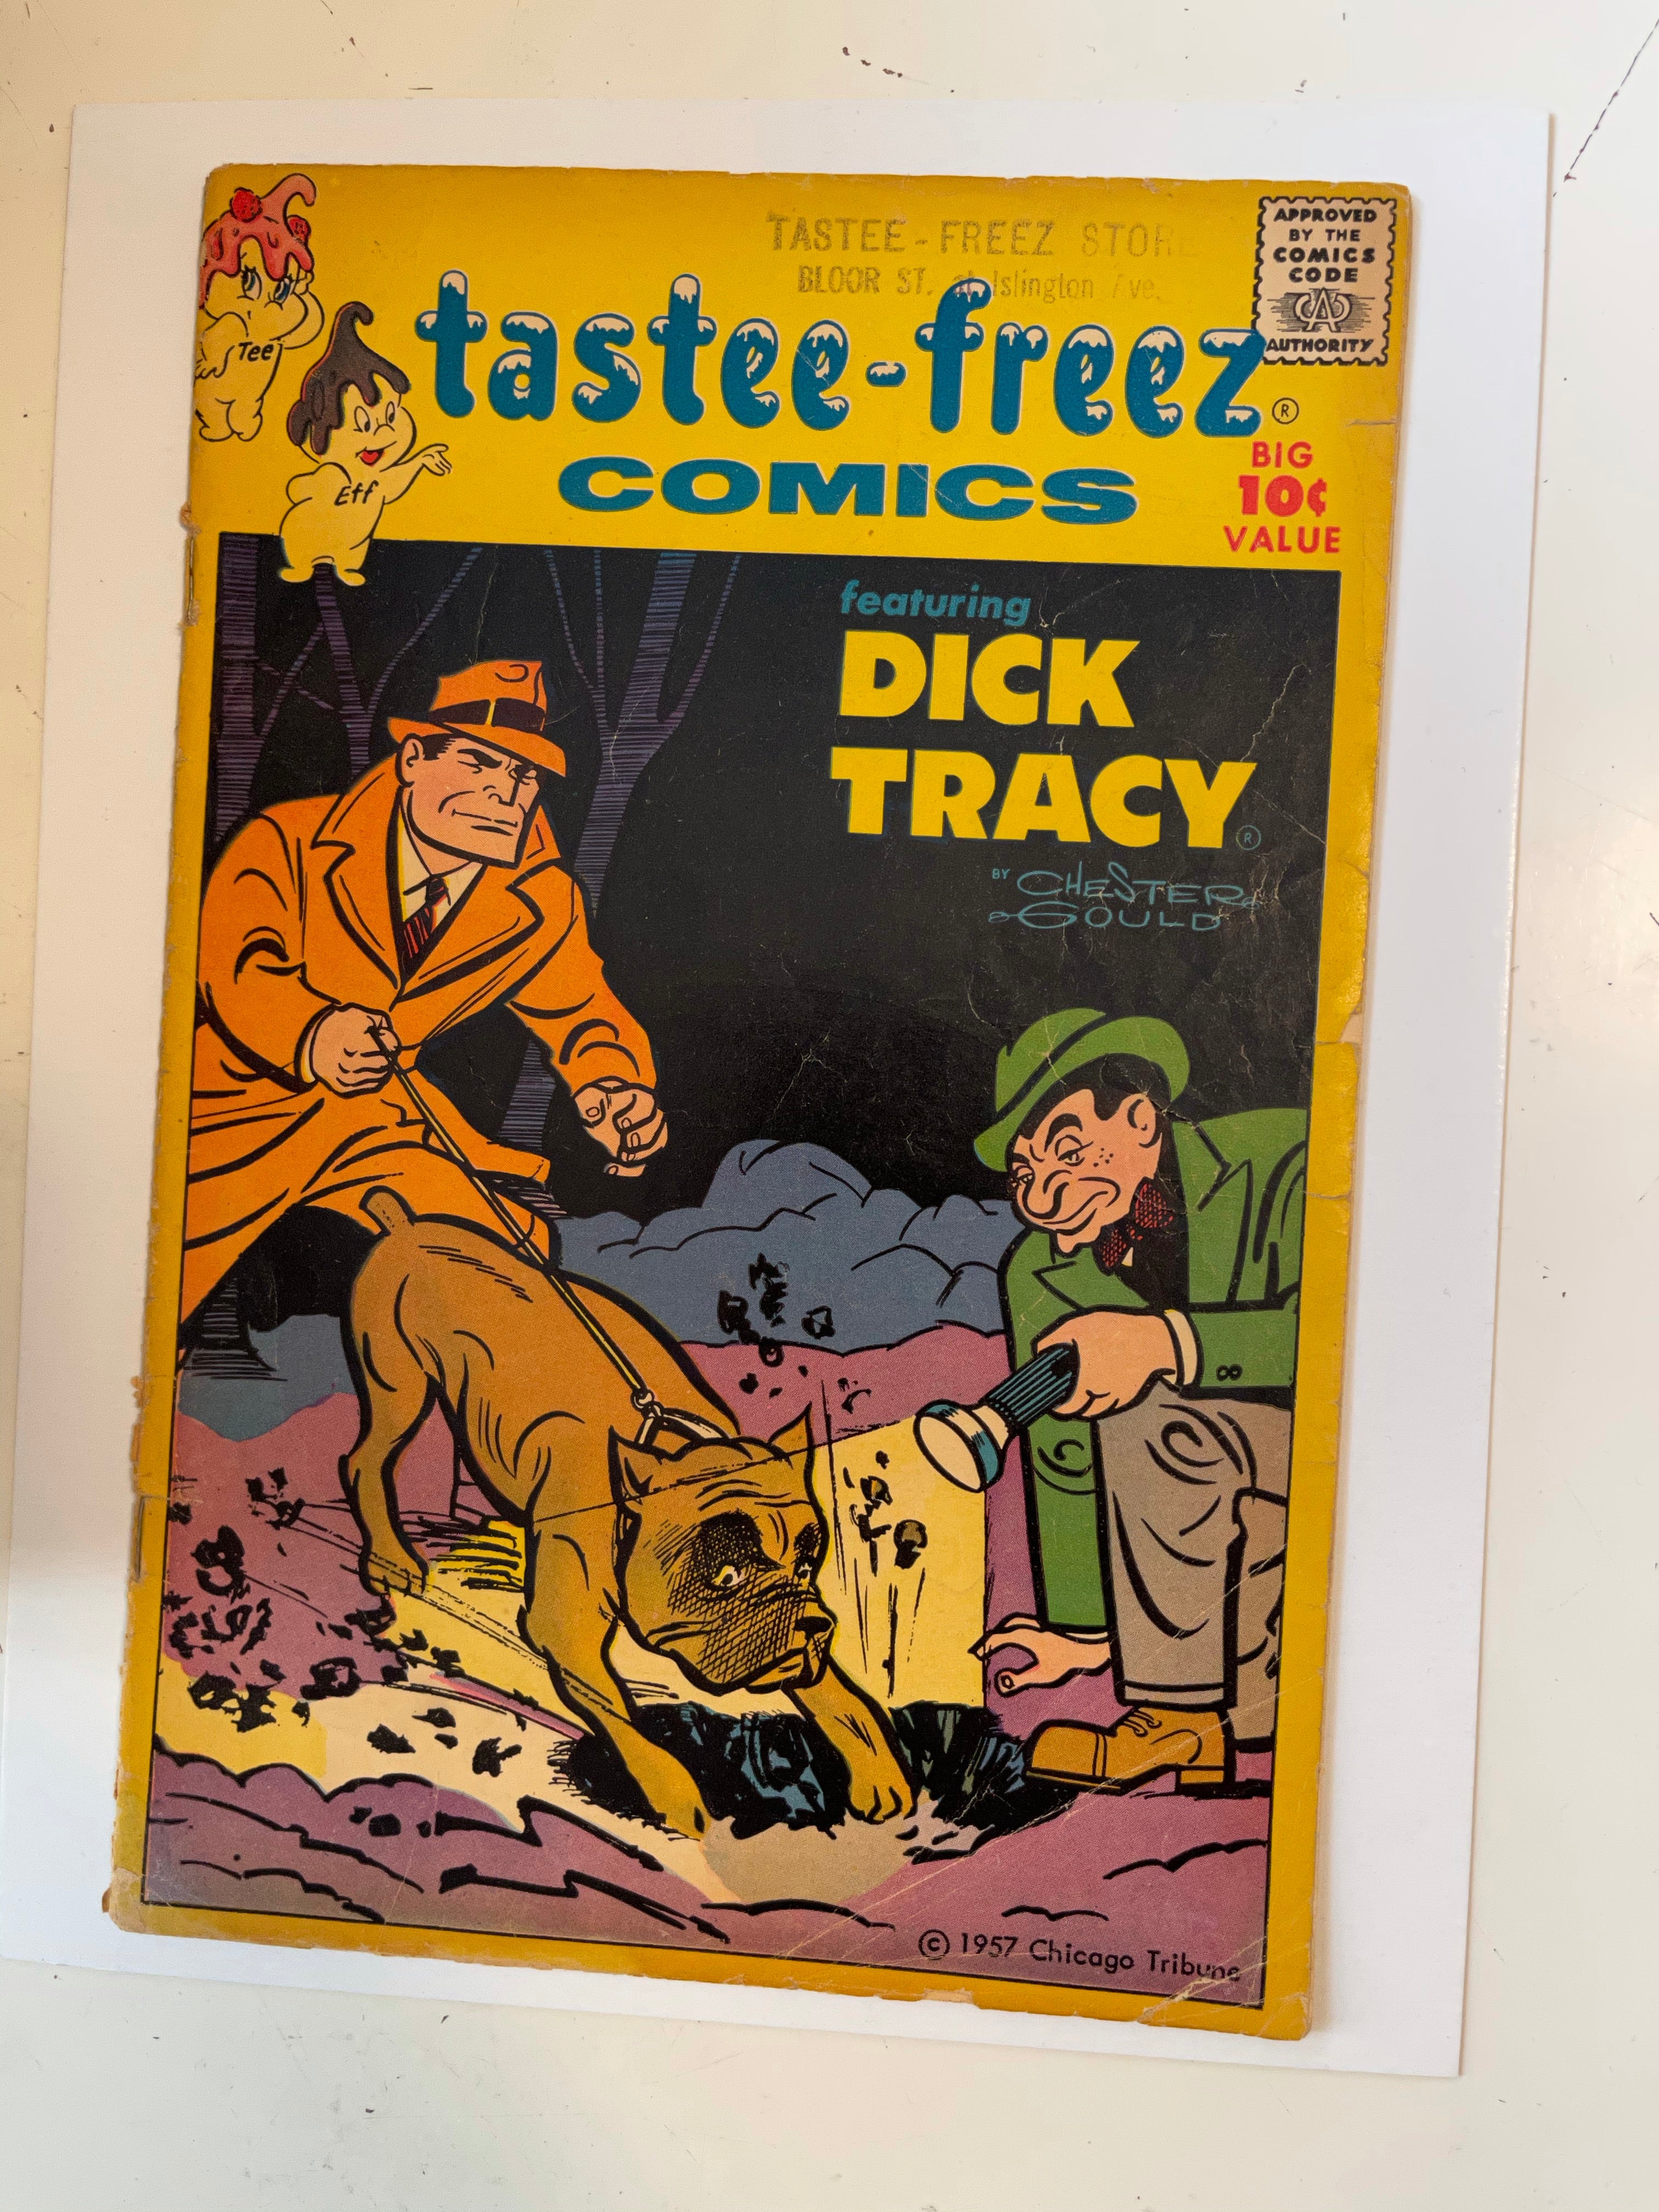 Dick Tracy vg condition vintage comic 1957